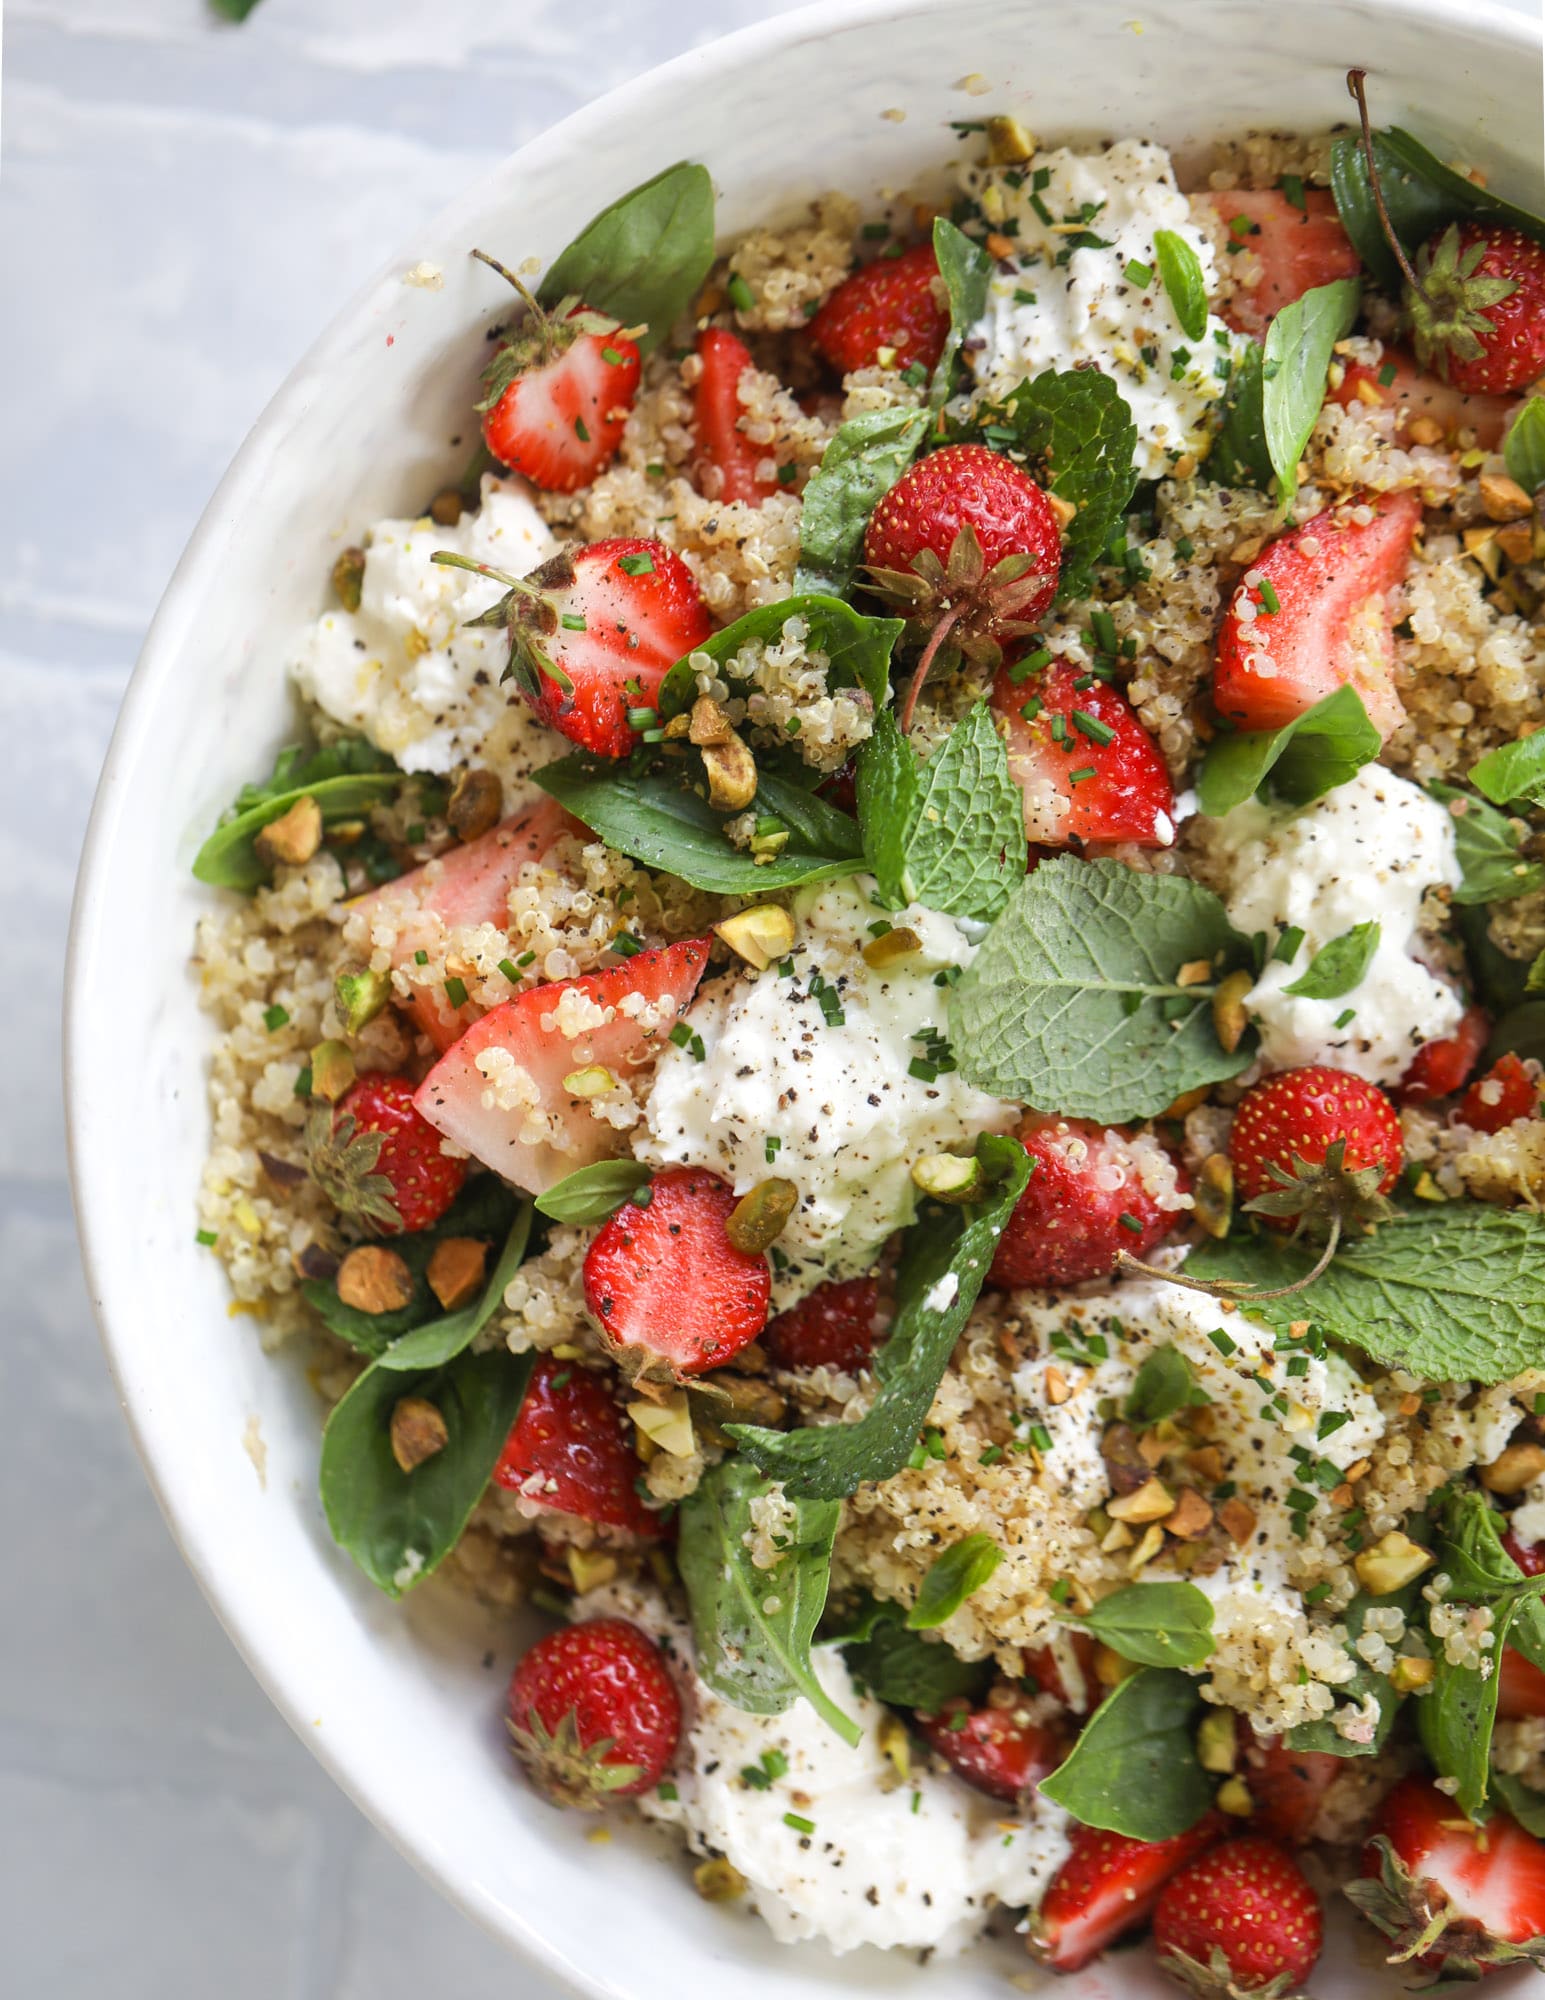 This strawberry quinoa salad is loaded with fresh herbs, burrata cheese and chopped pistachios. Topped with a lemon dressing, it's heavenly! 